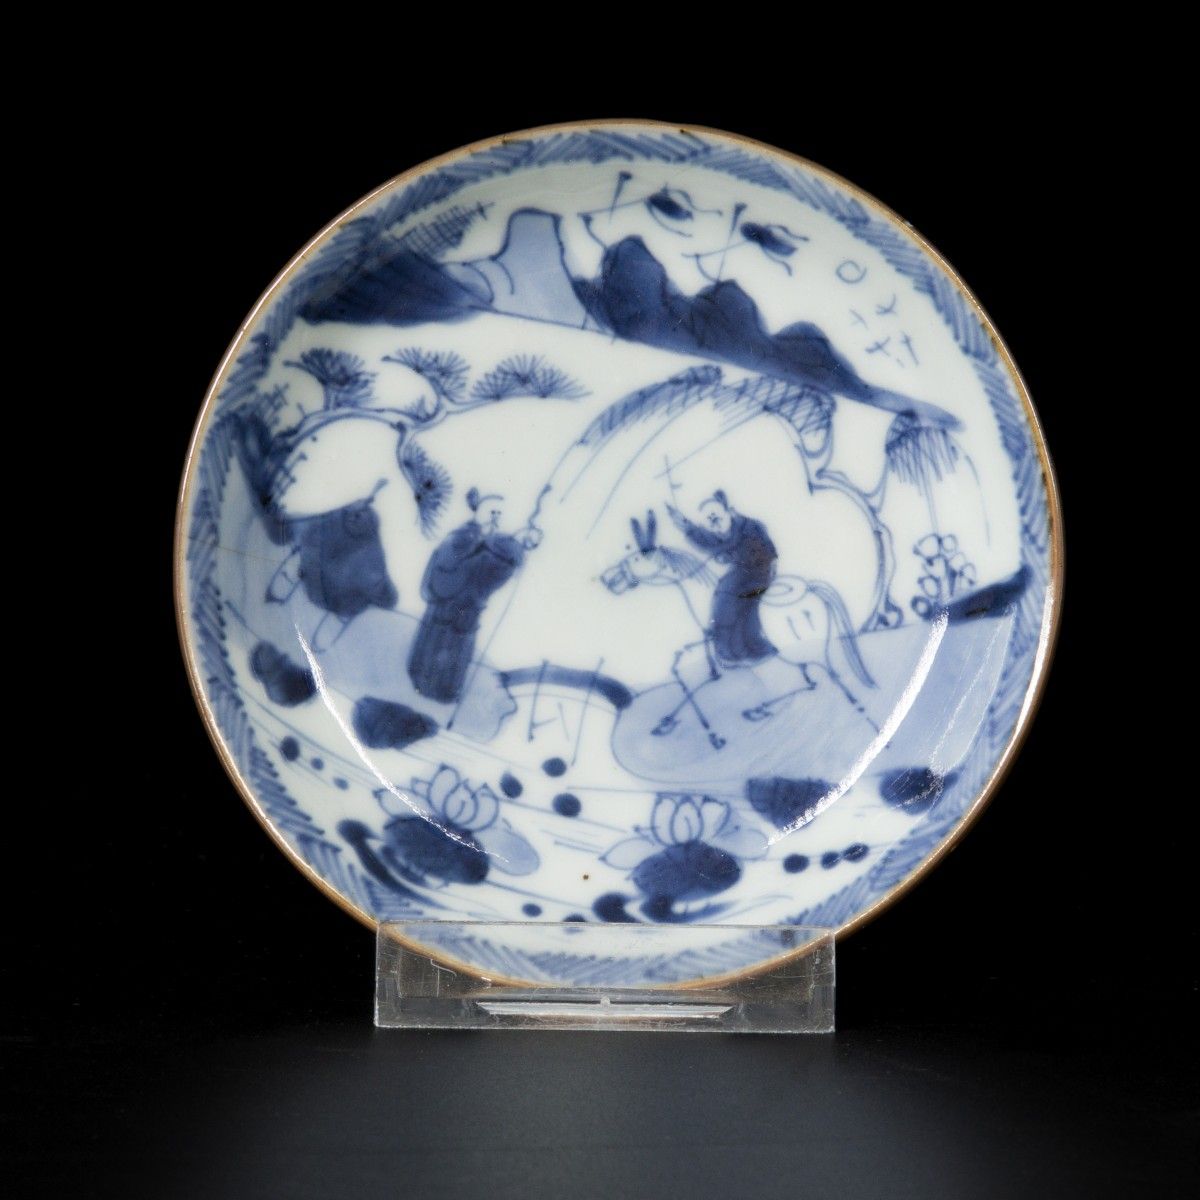 A porcelain plate decorated with figures in a landscape, China, 18th century. Du&hellip;